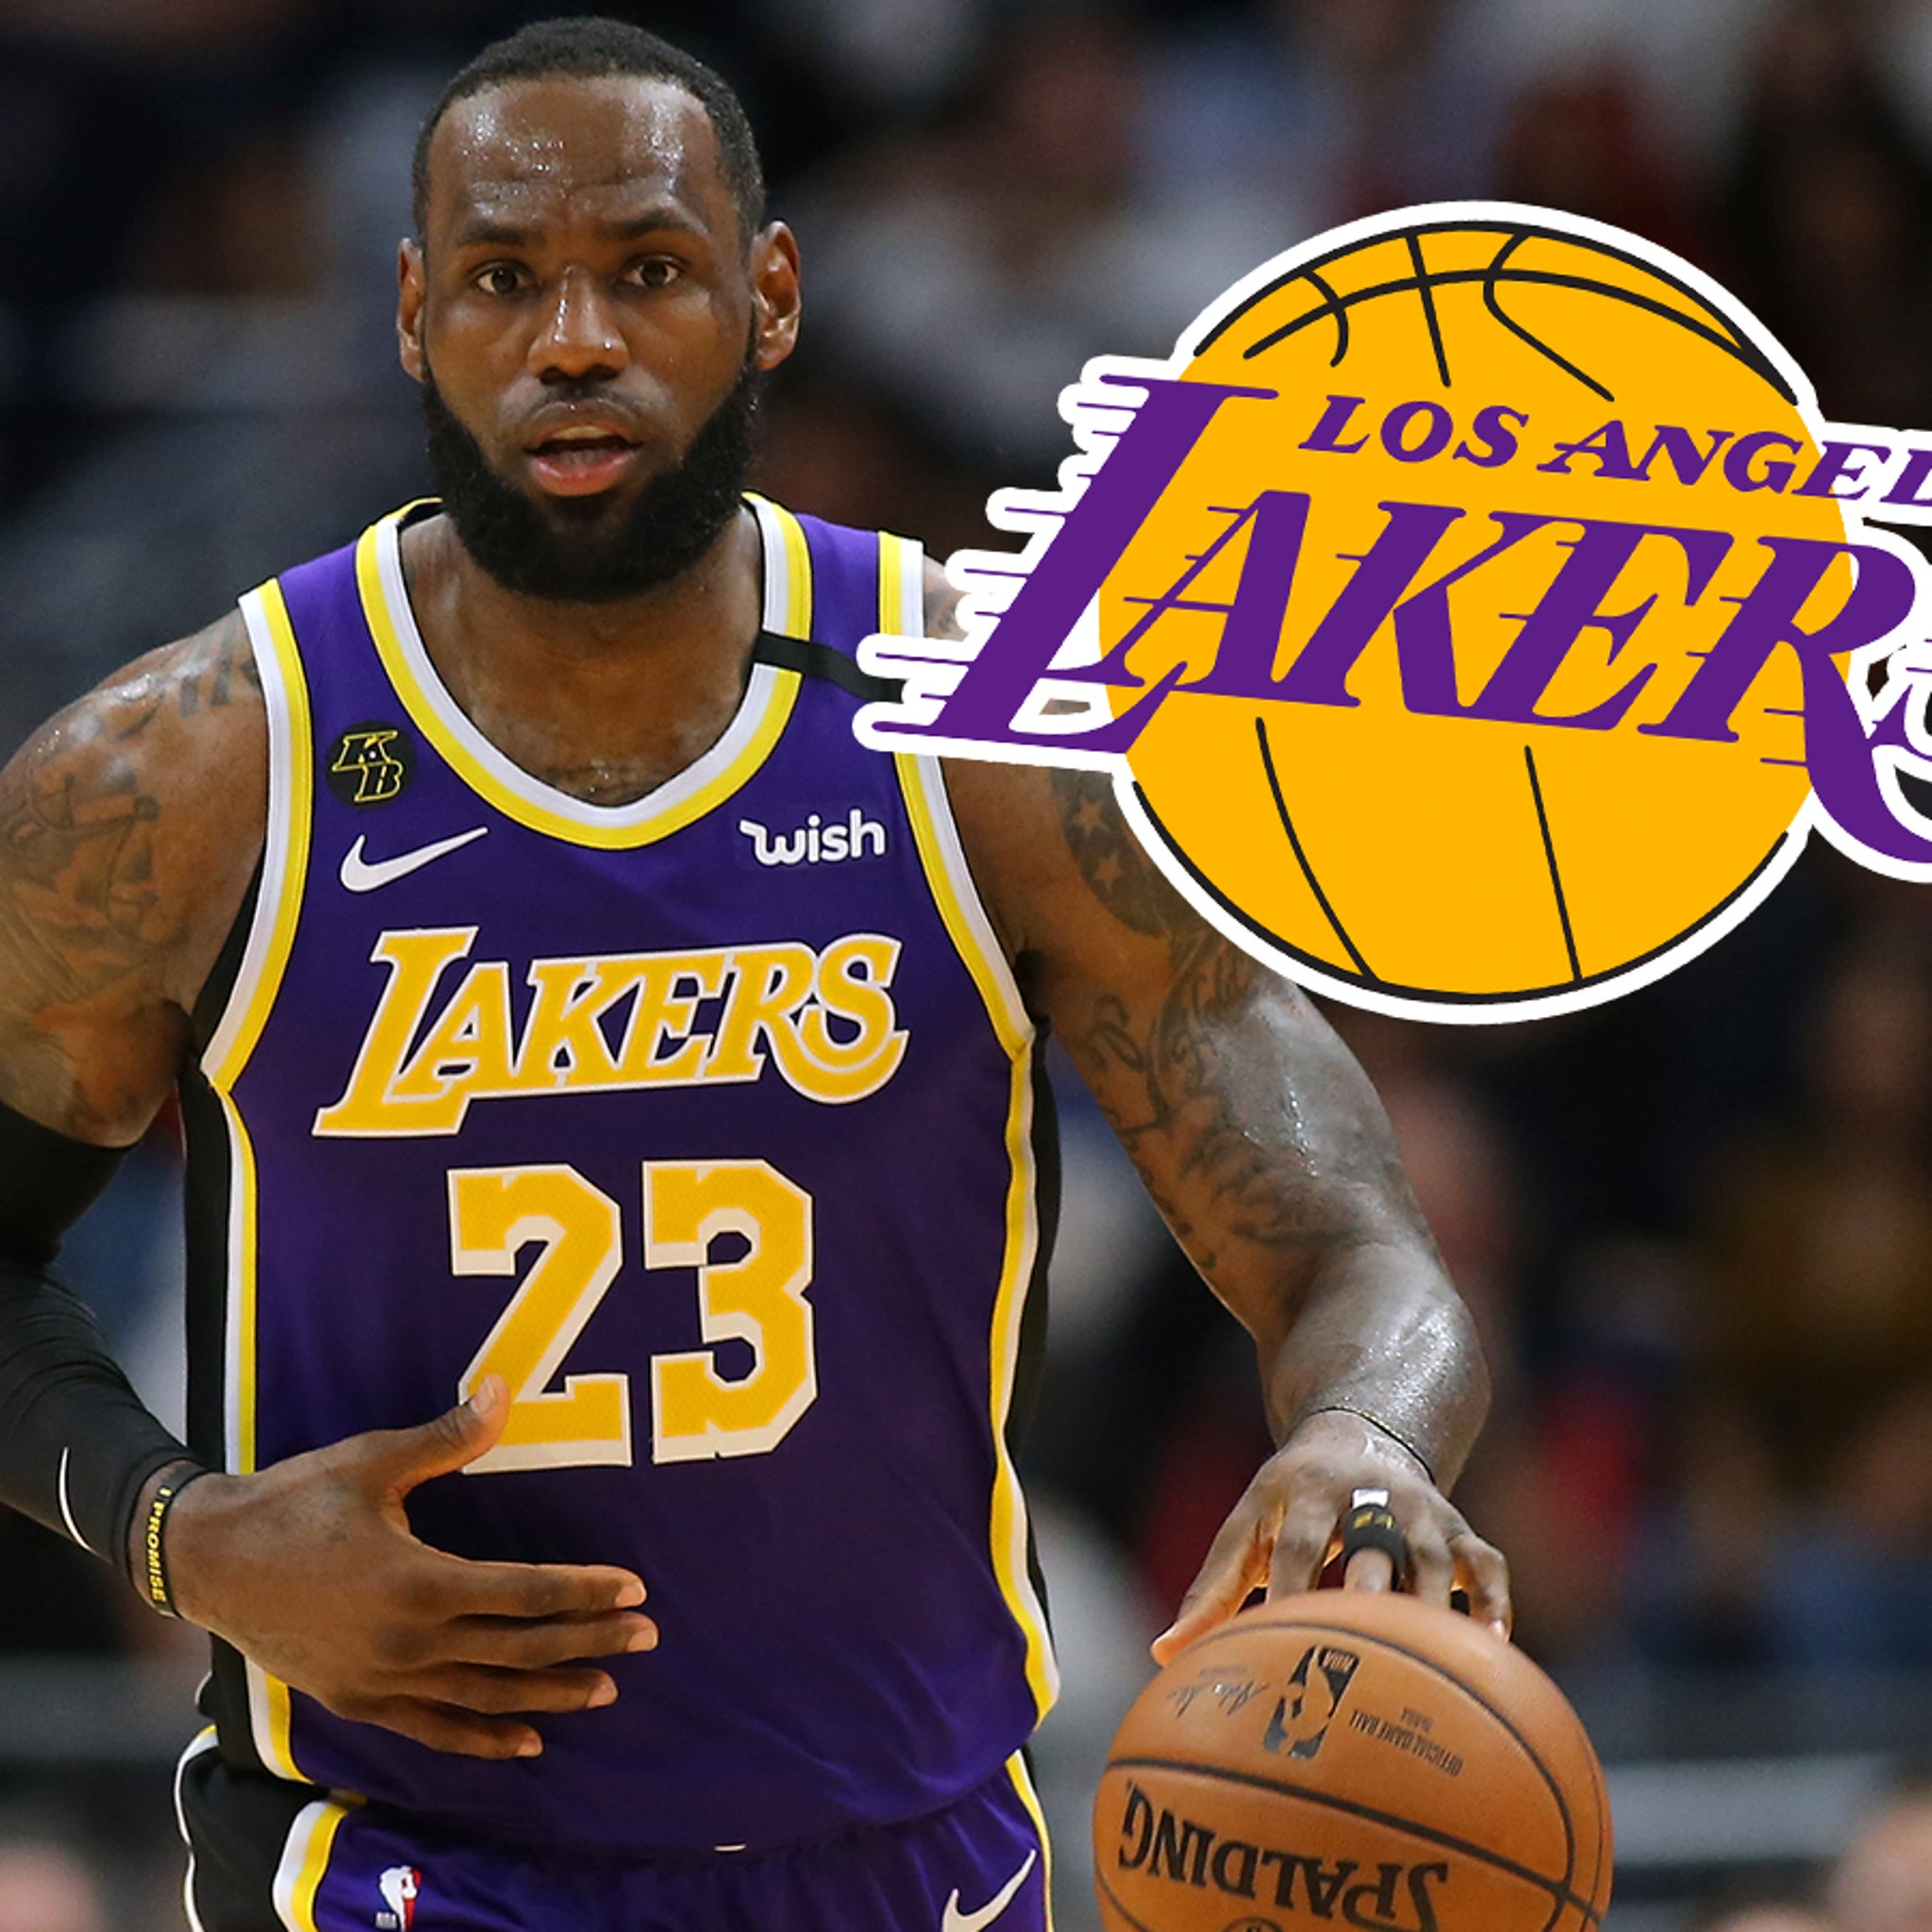 Los Angeles Lakers granted approval for $80 million training